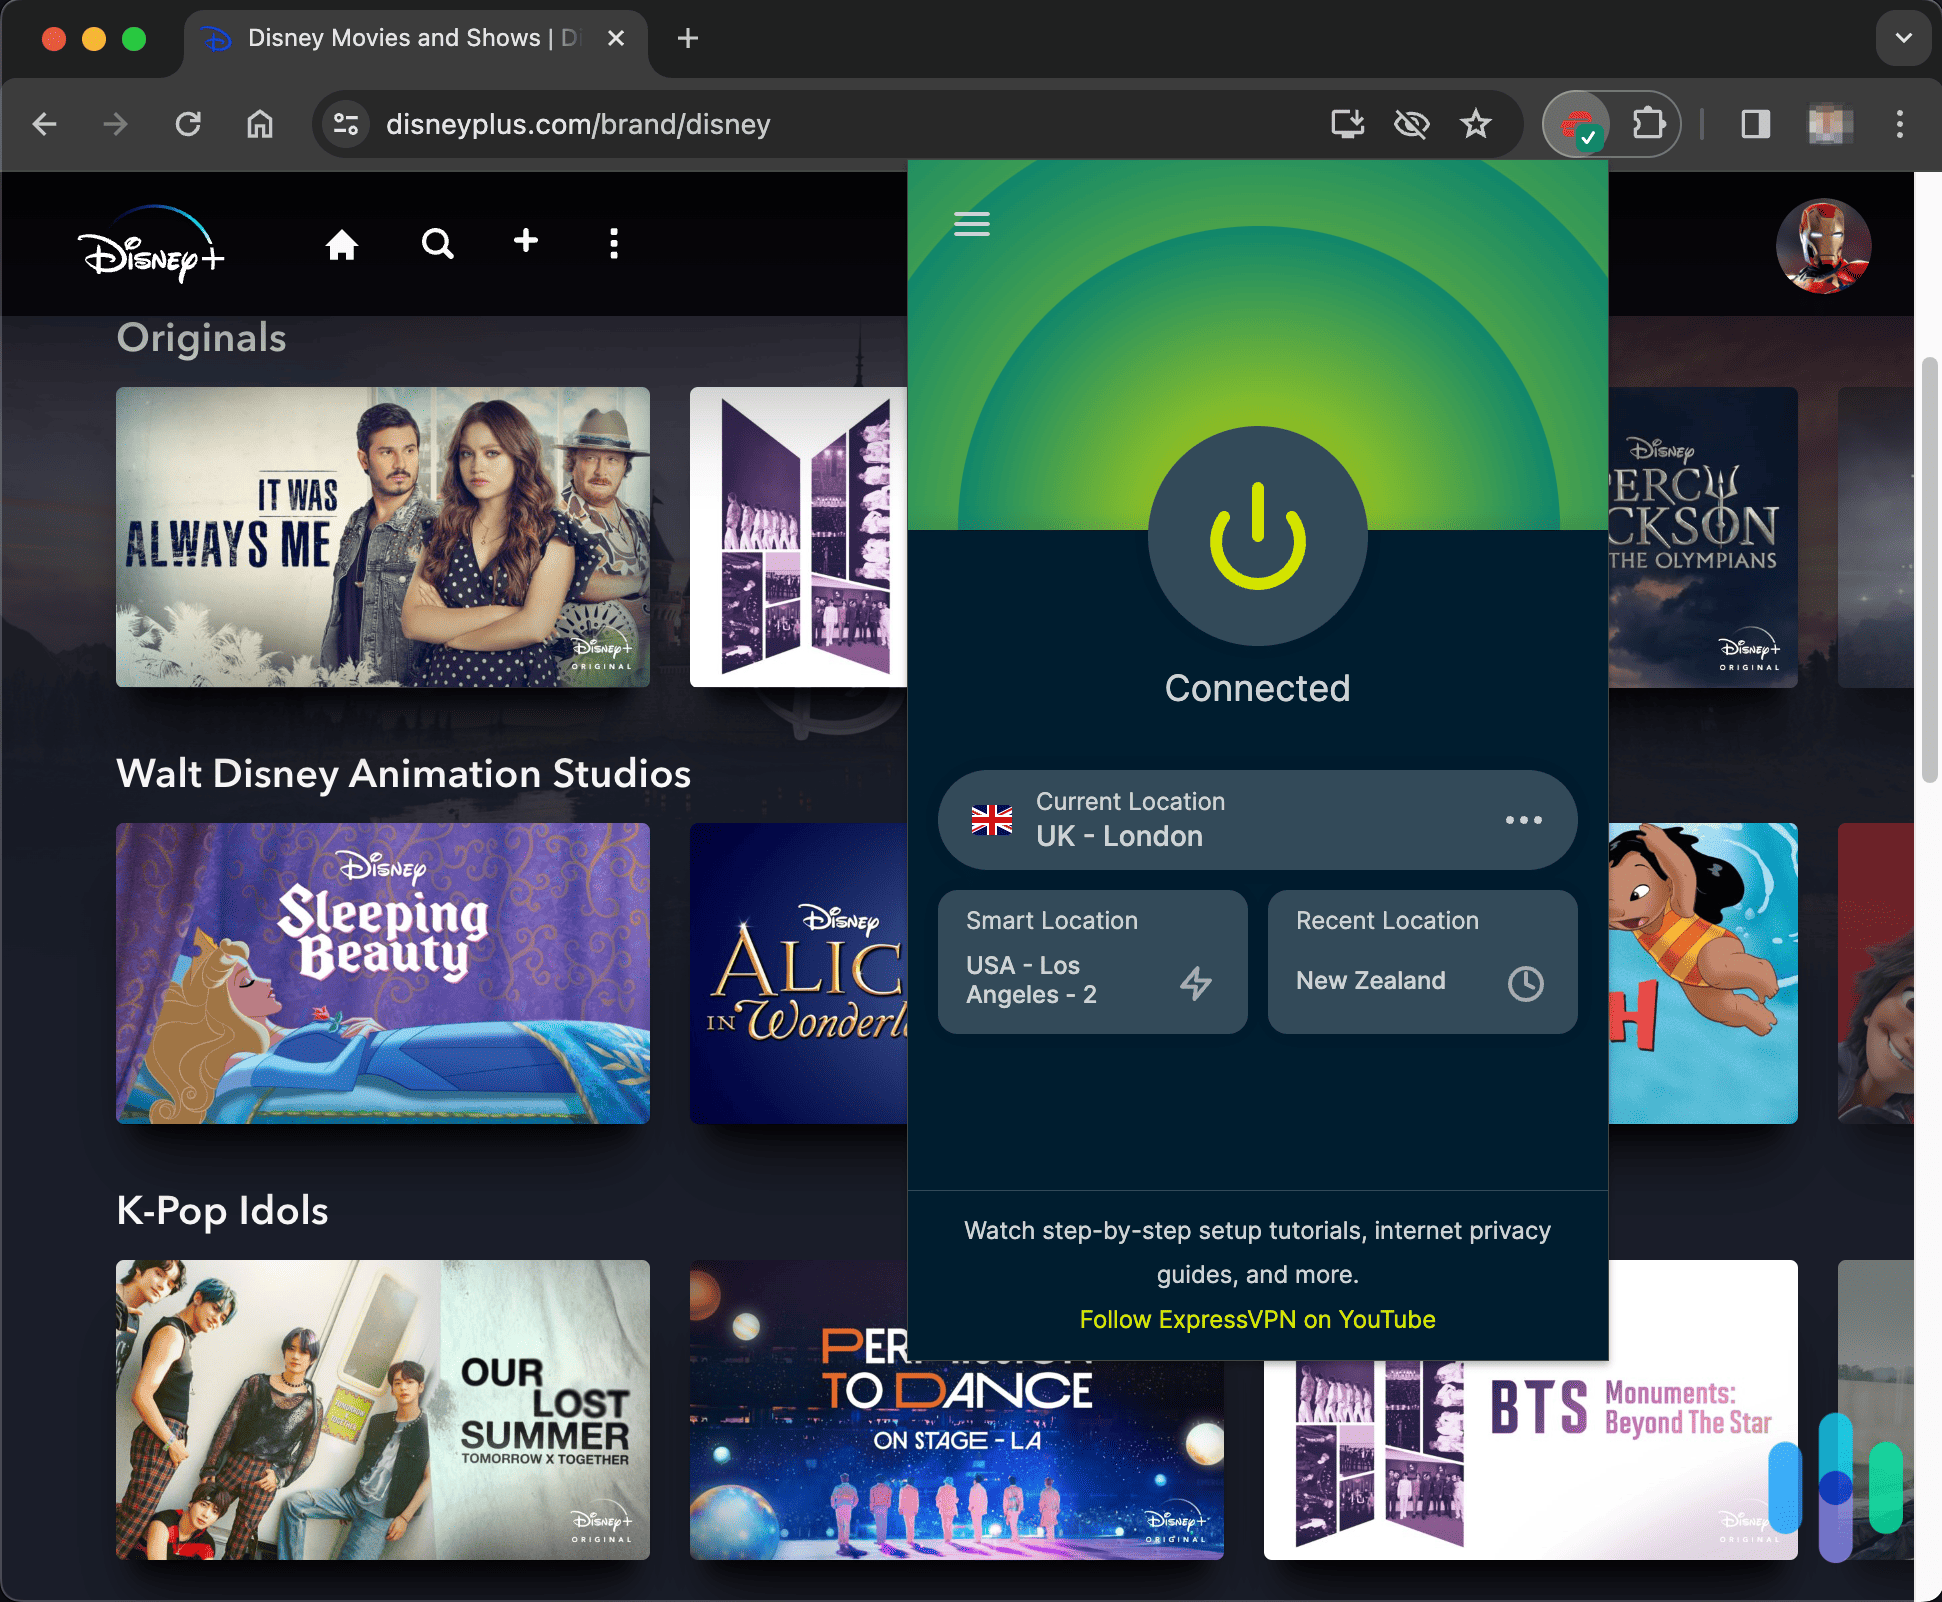 On Disney Plus connected to London, UK using ExpressVPN with the Chrome extension